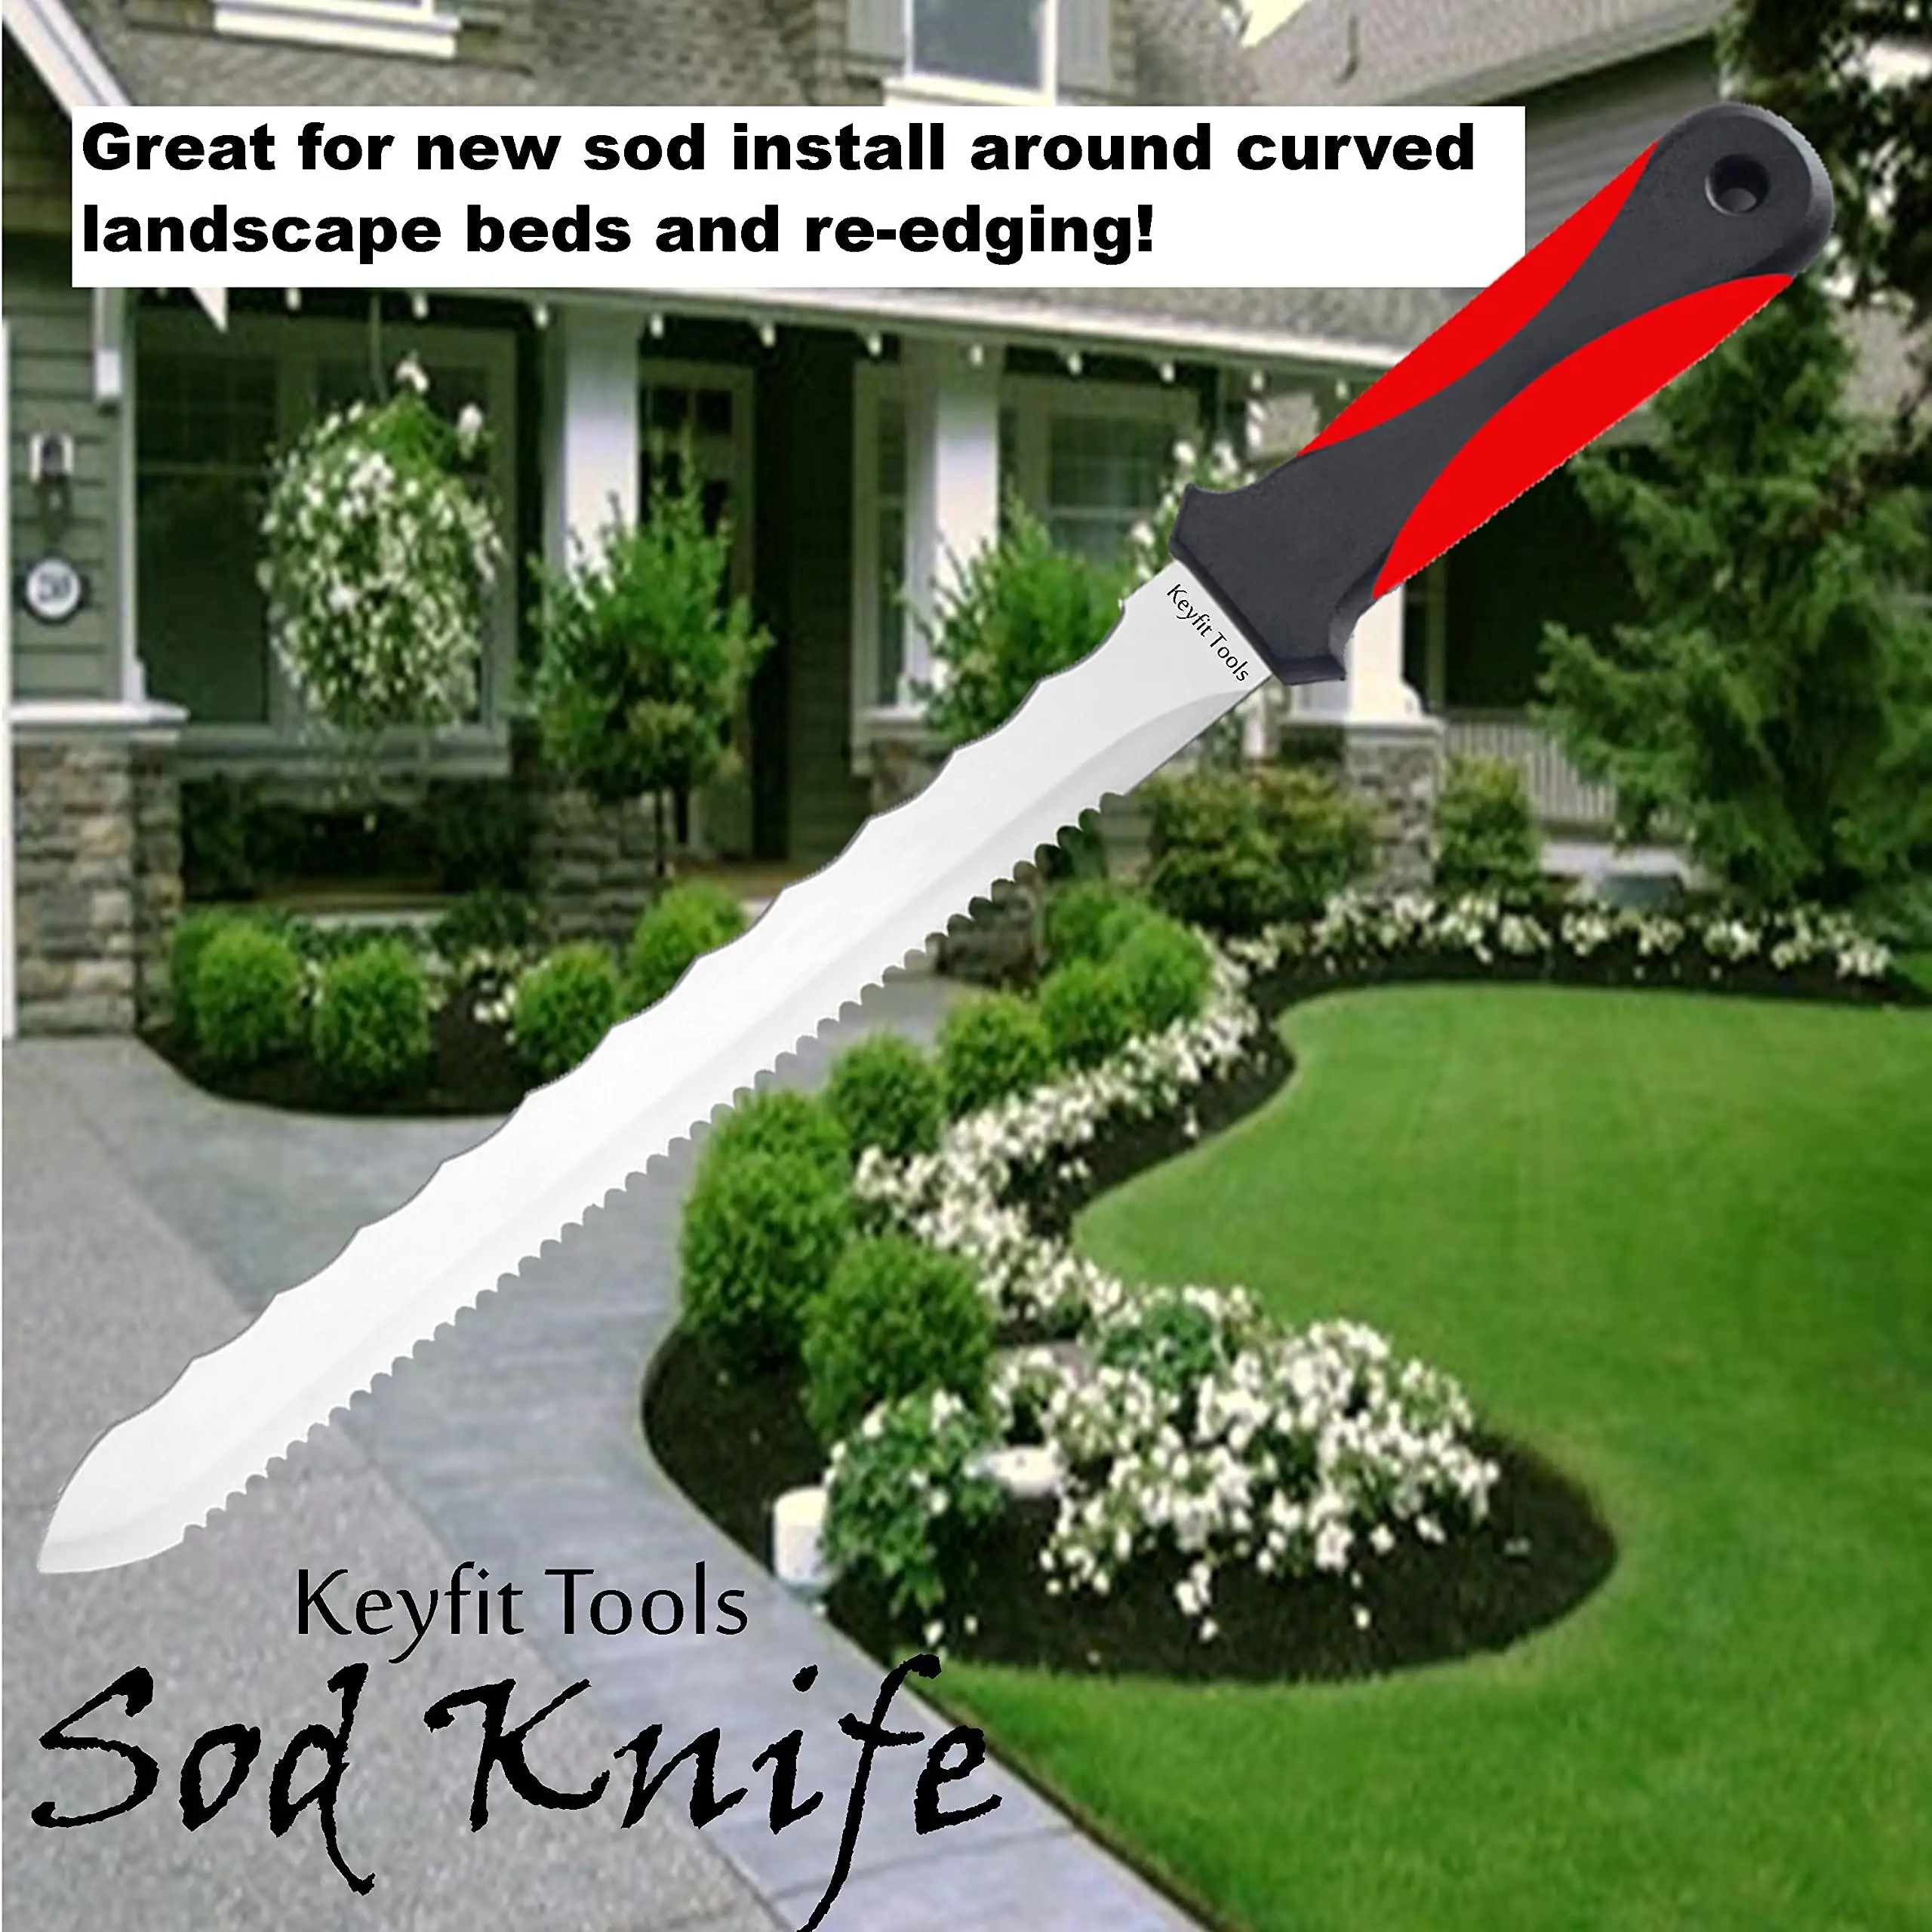 Stainless Steel Garden Knife with Red Handle Double Side Utility Cutter Lawn Repair Garden insulation knife